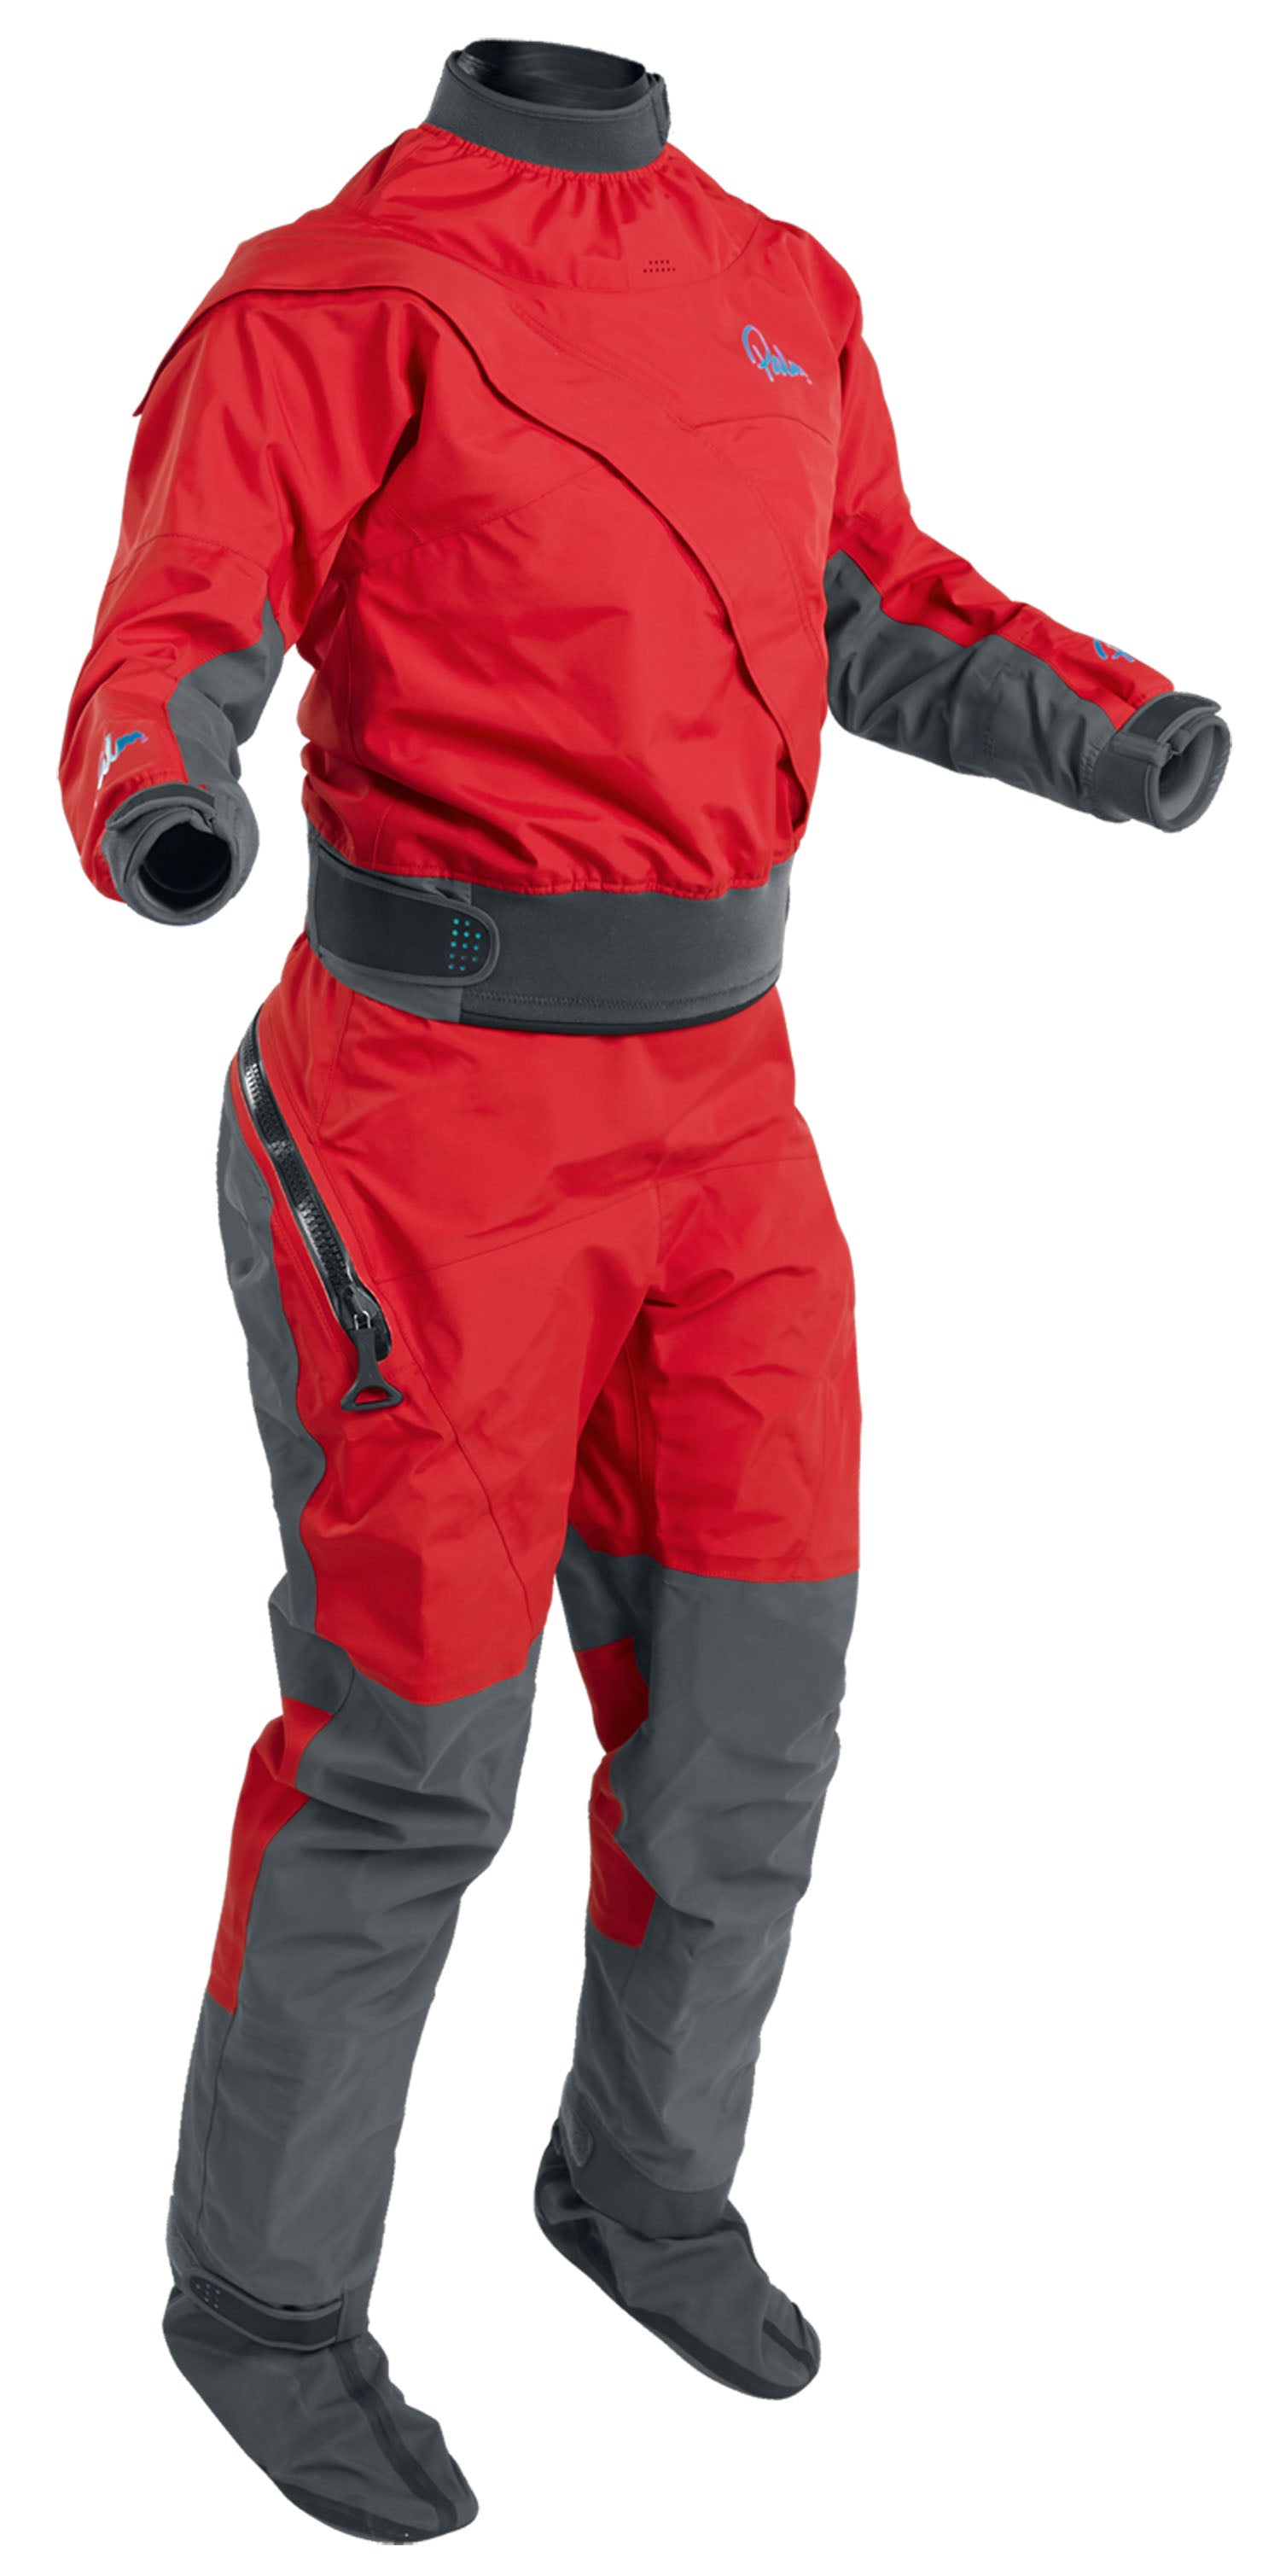 Palm Cascade Womens Drysuit in Flame and Jet Grey